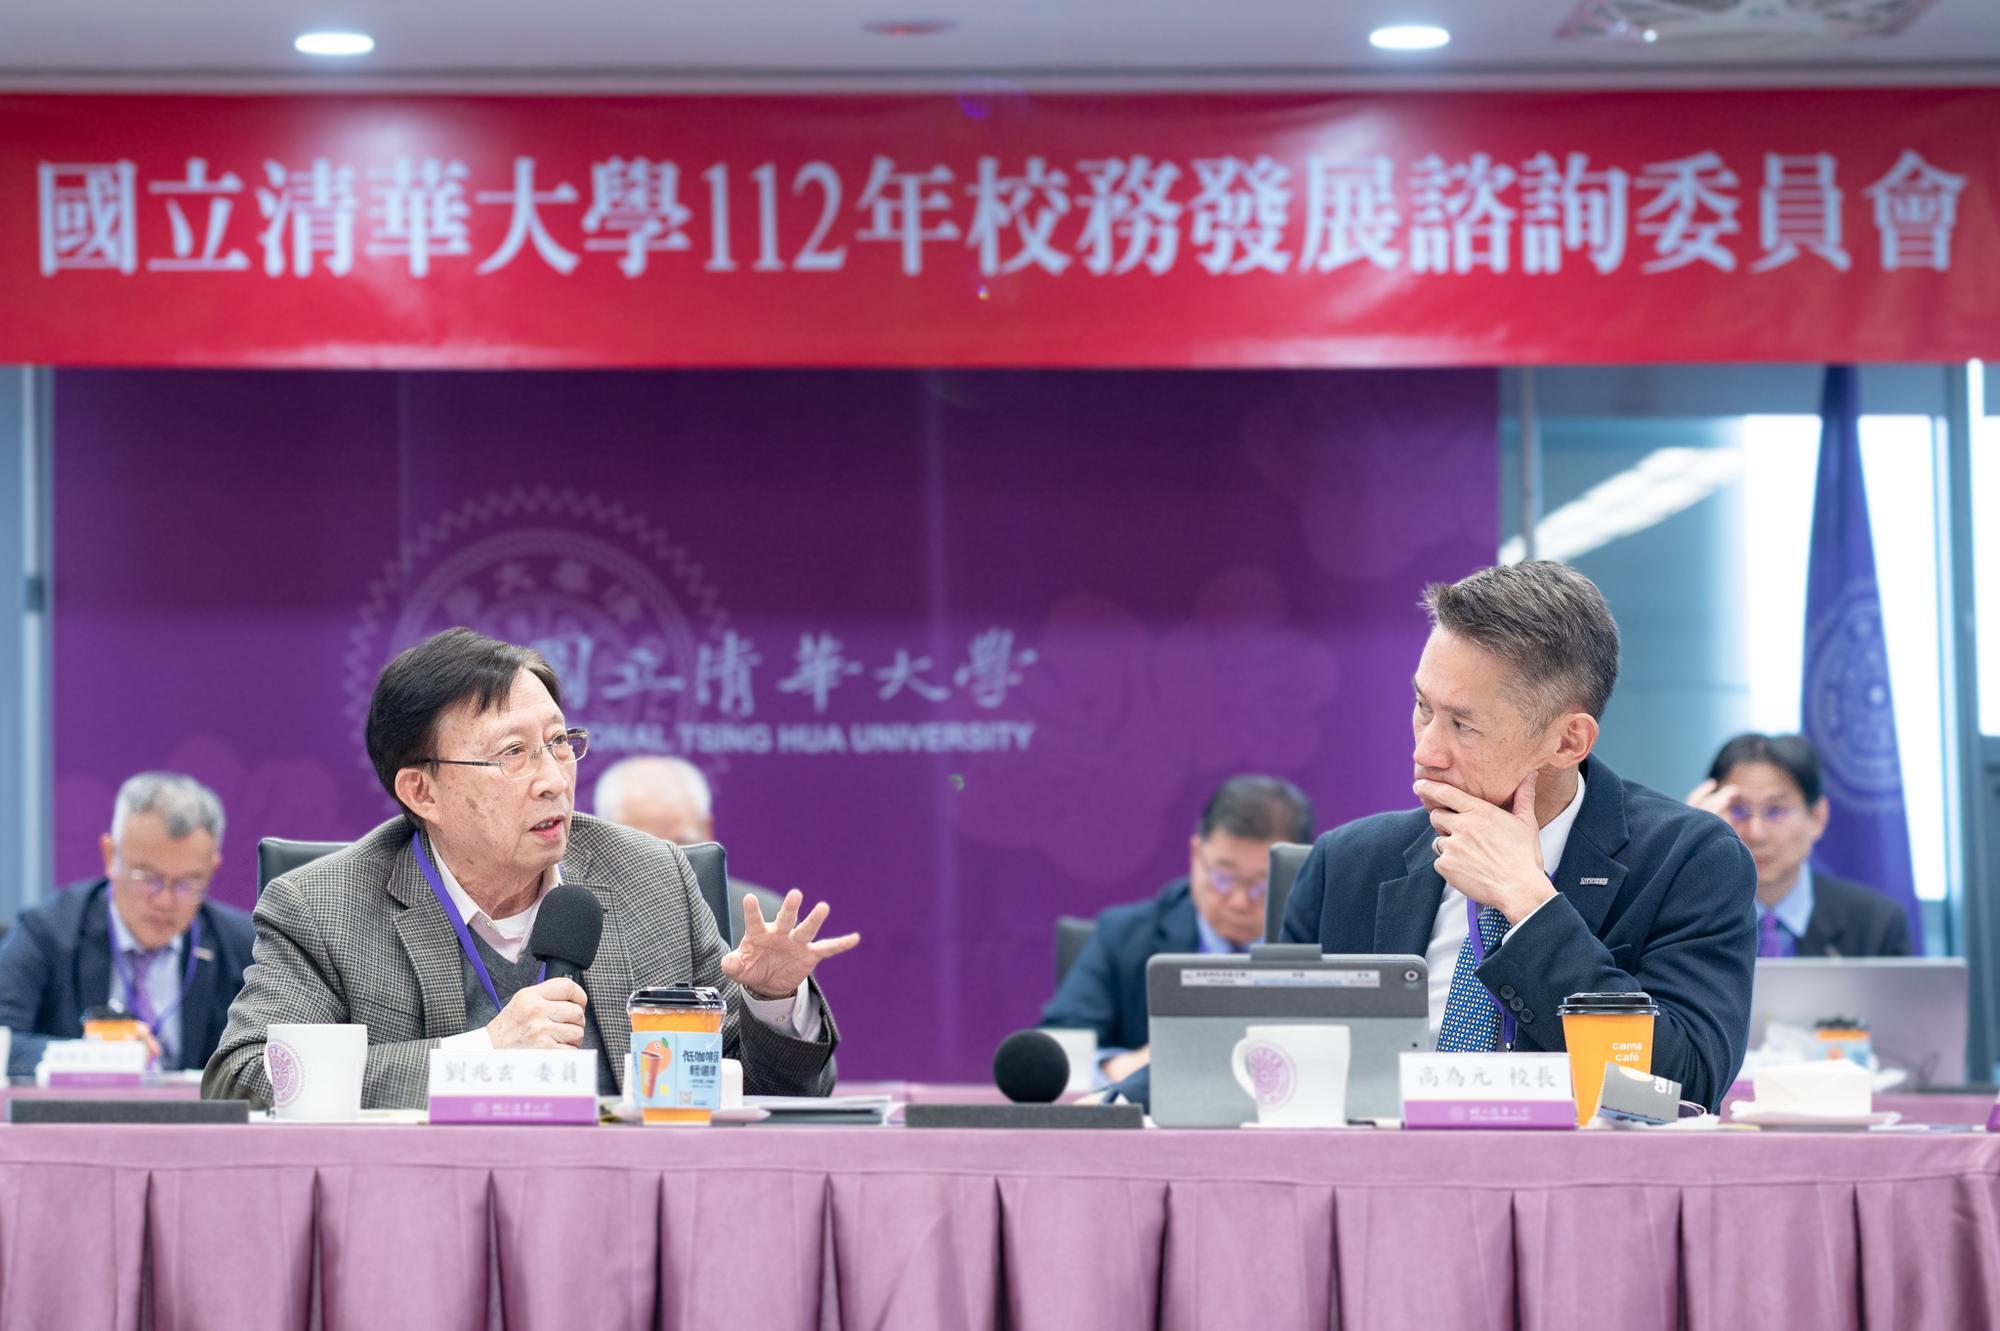 President W. John Kao (高為元)
(right) listens to the suggestions of Committee Member Dr. Chao-Shiuan Liu (劉兆玄).